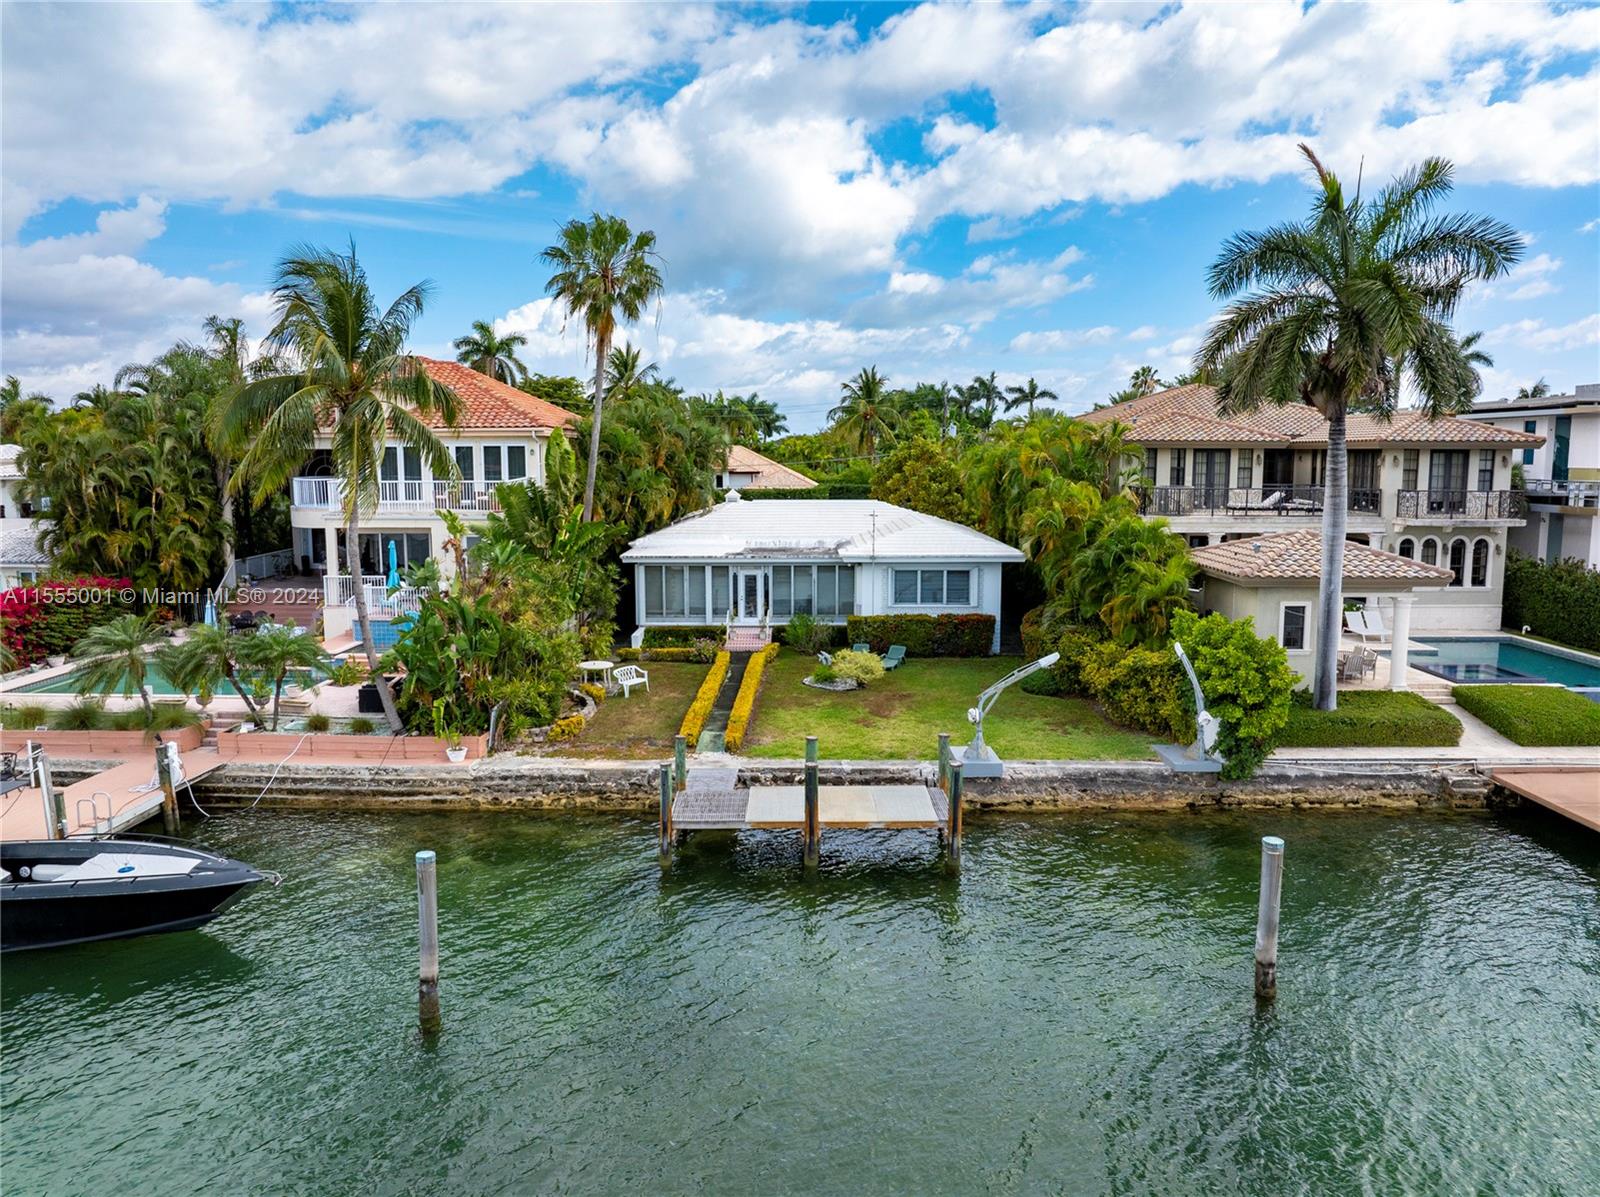 Location & Price! The best of both worlds. This never before listed premier Hibiscus Island property is now available and perfect for someone looking to knock down and create their own style Dream house of waterfront property with the best sticker price. This timeless piece is within 5 minutes driving to Miami's Beaches, Cruise lines and Miami's Downtown area. The island offers private tennis courts and playground for their residents. Property will require the seawall to be repaired. Except for seawall repairs the house is charming with unique characters of the 1950's.